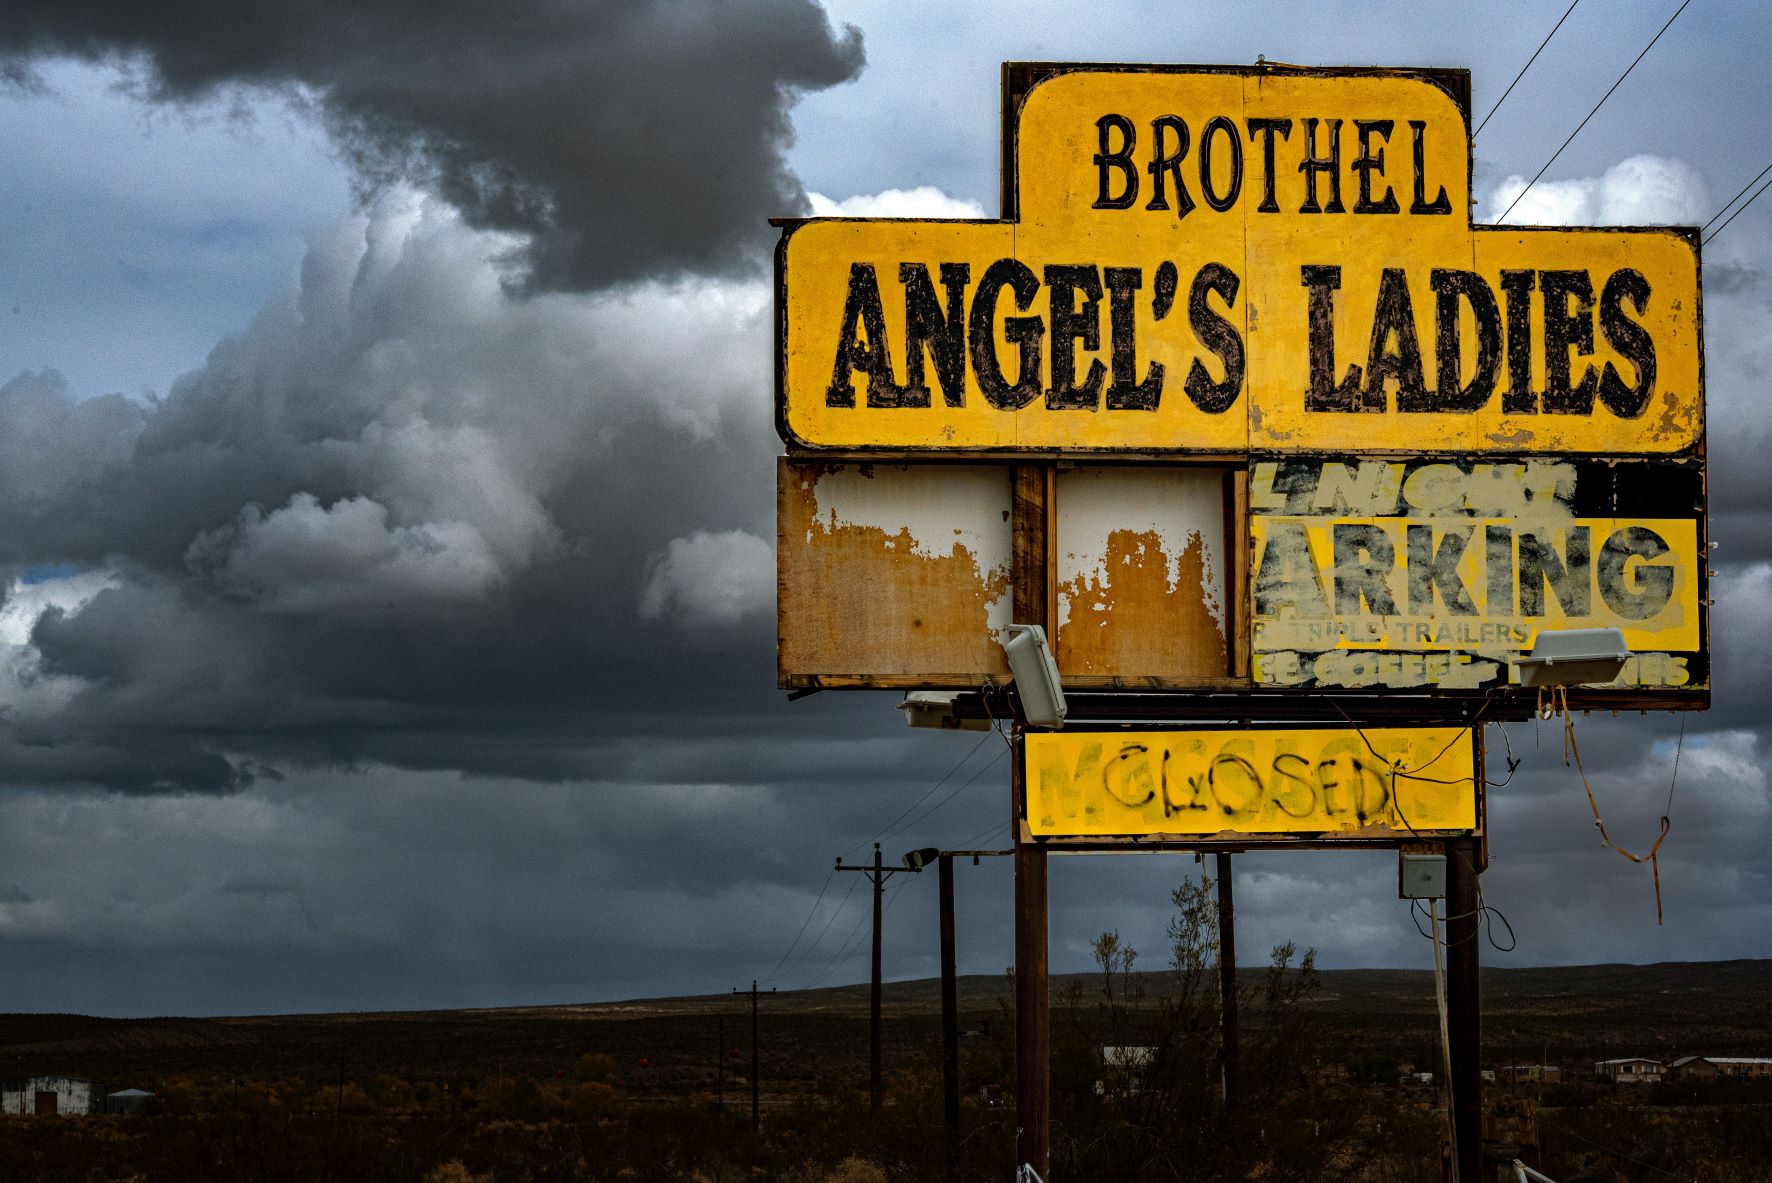 worn sign for brothel called angels ladies